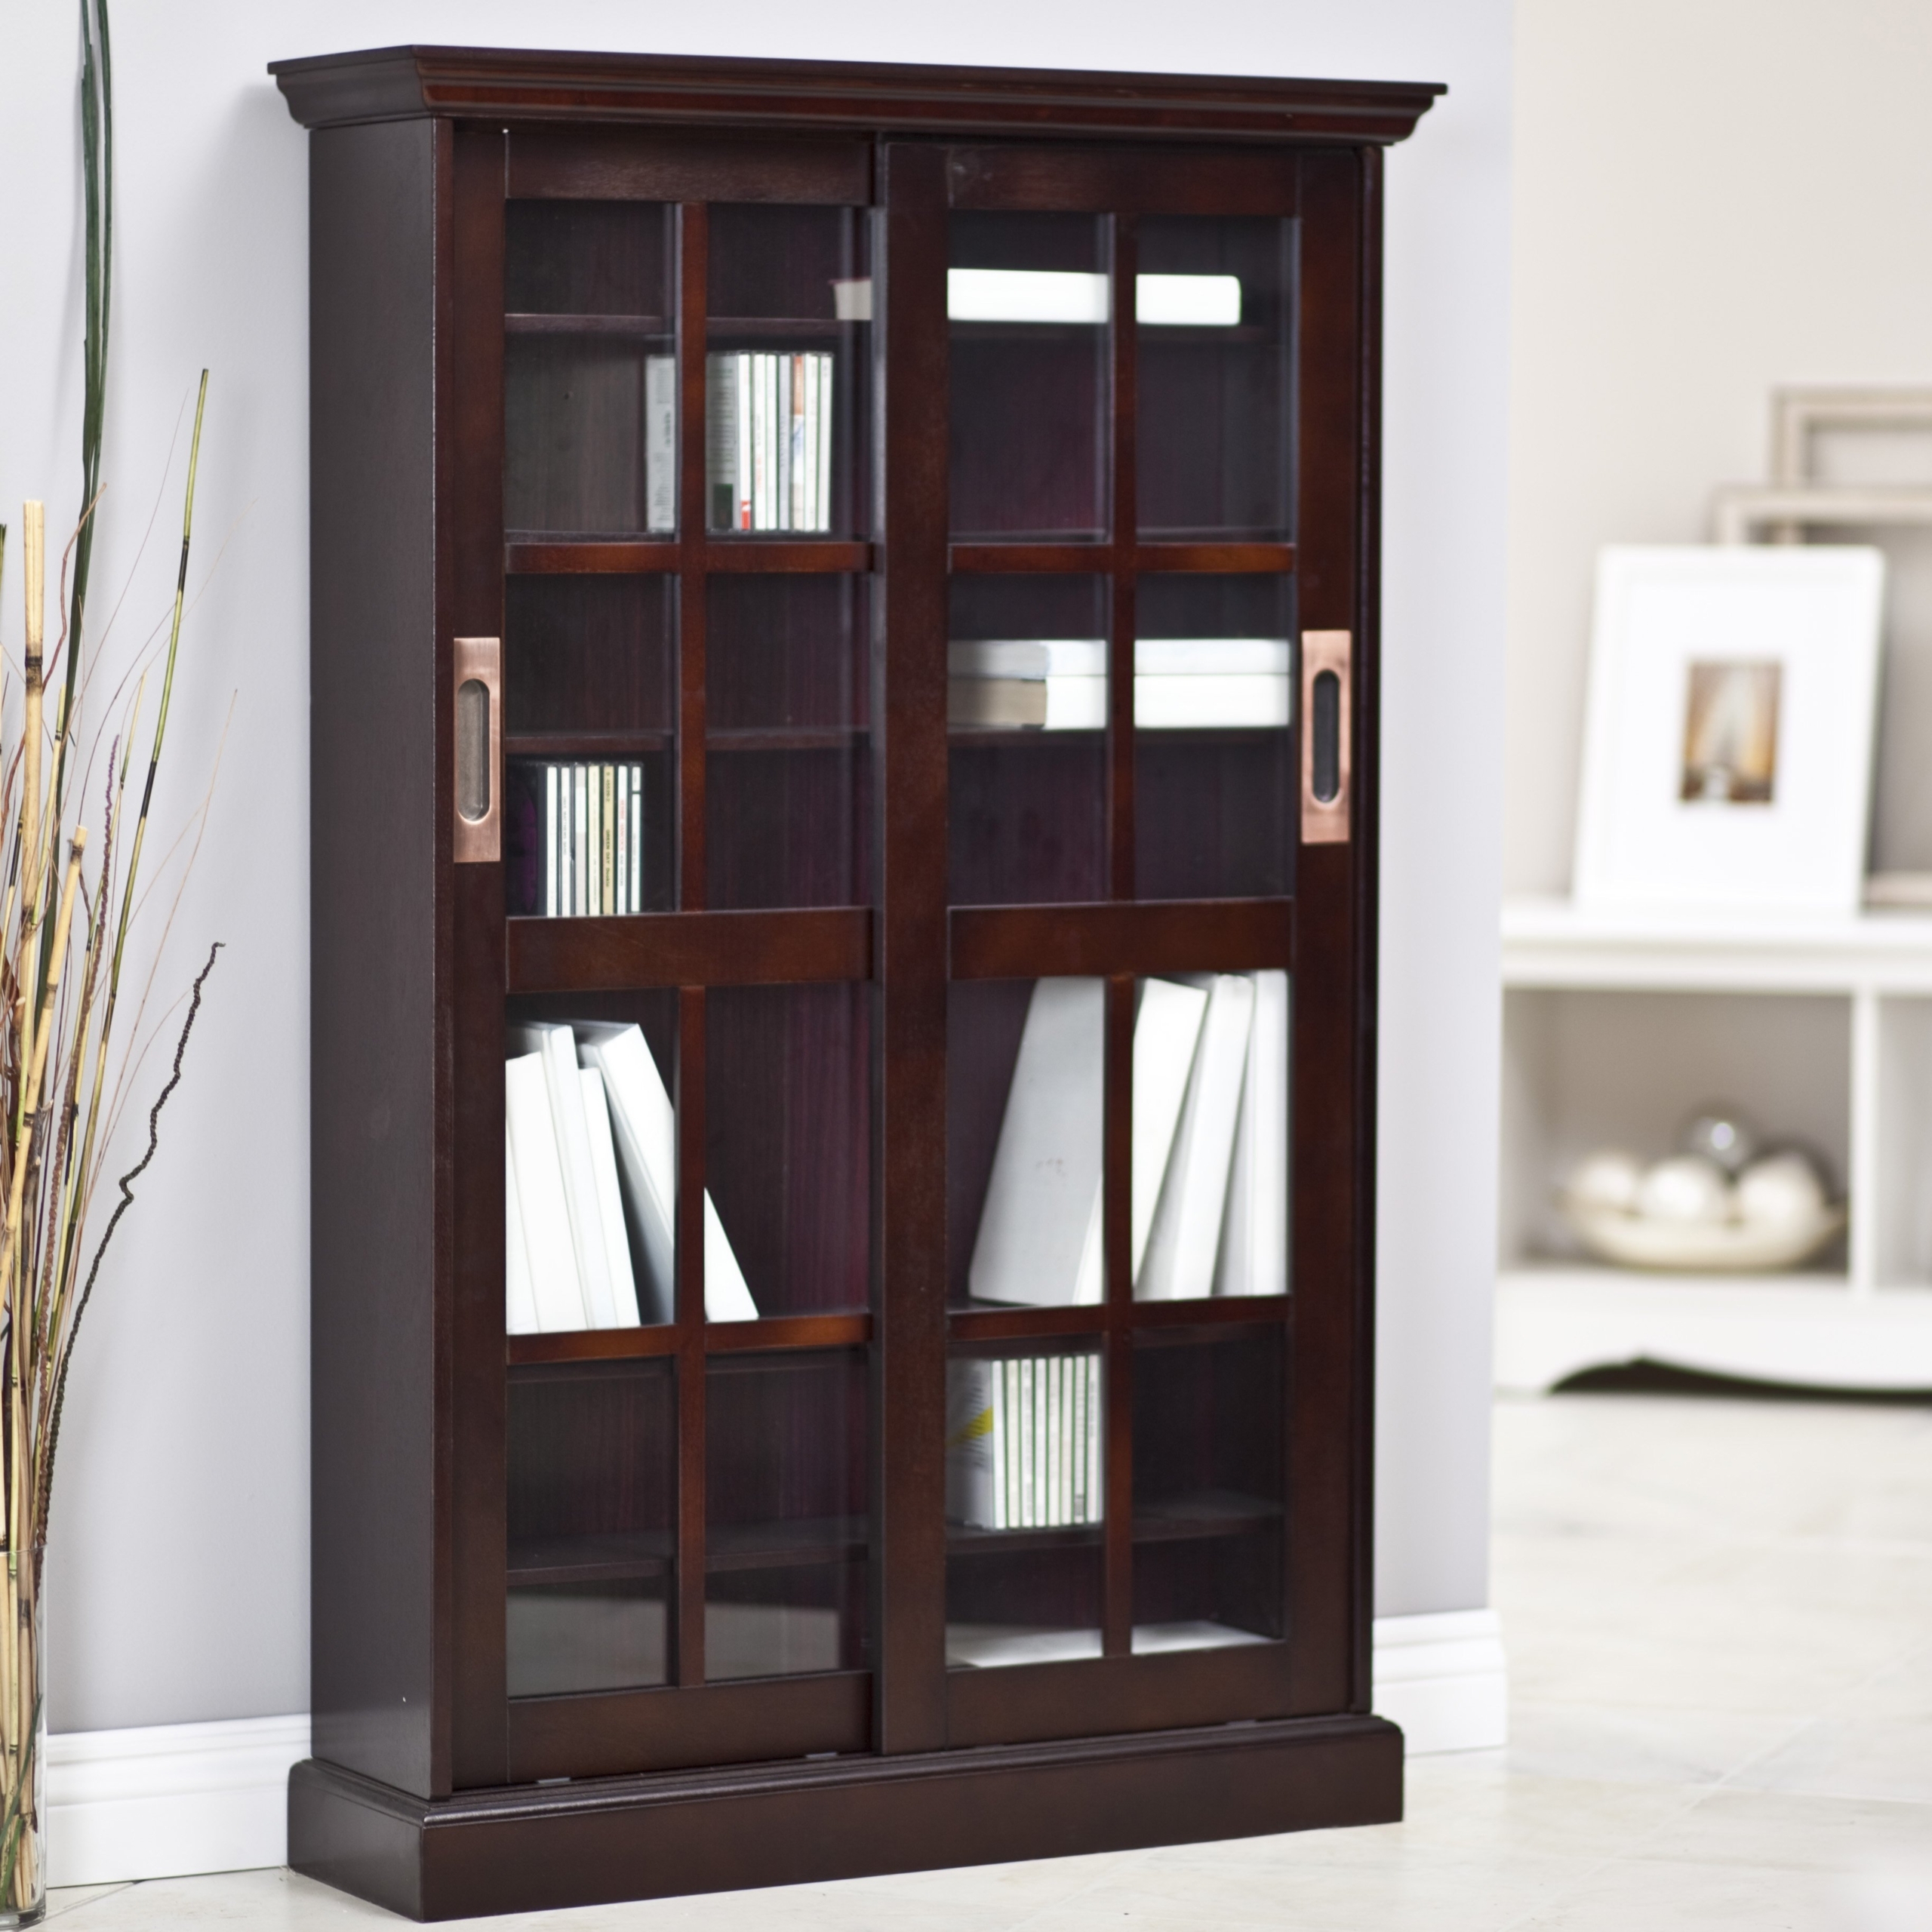 Small bookcase with glass doors 17